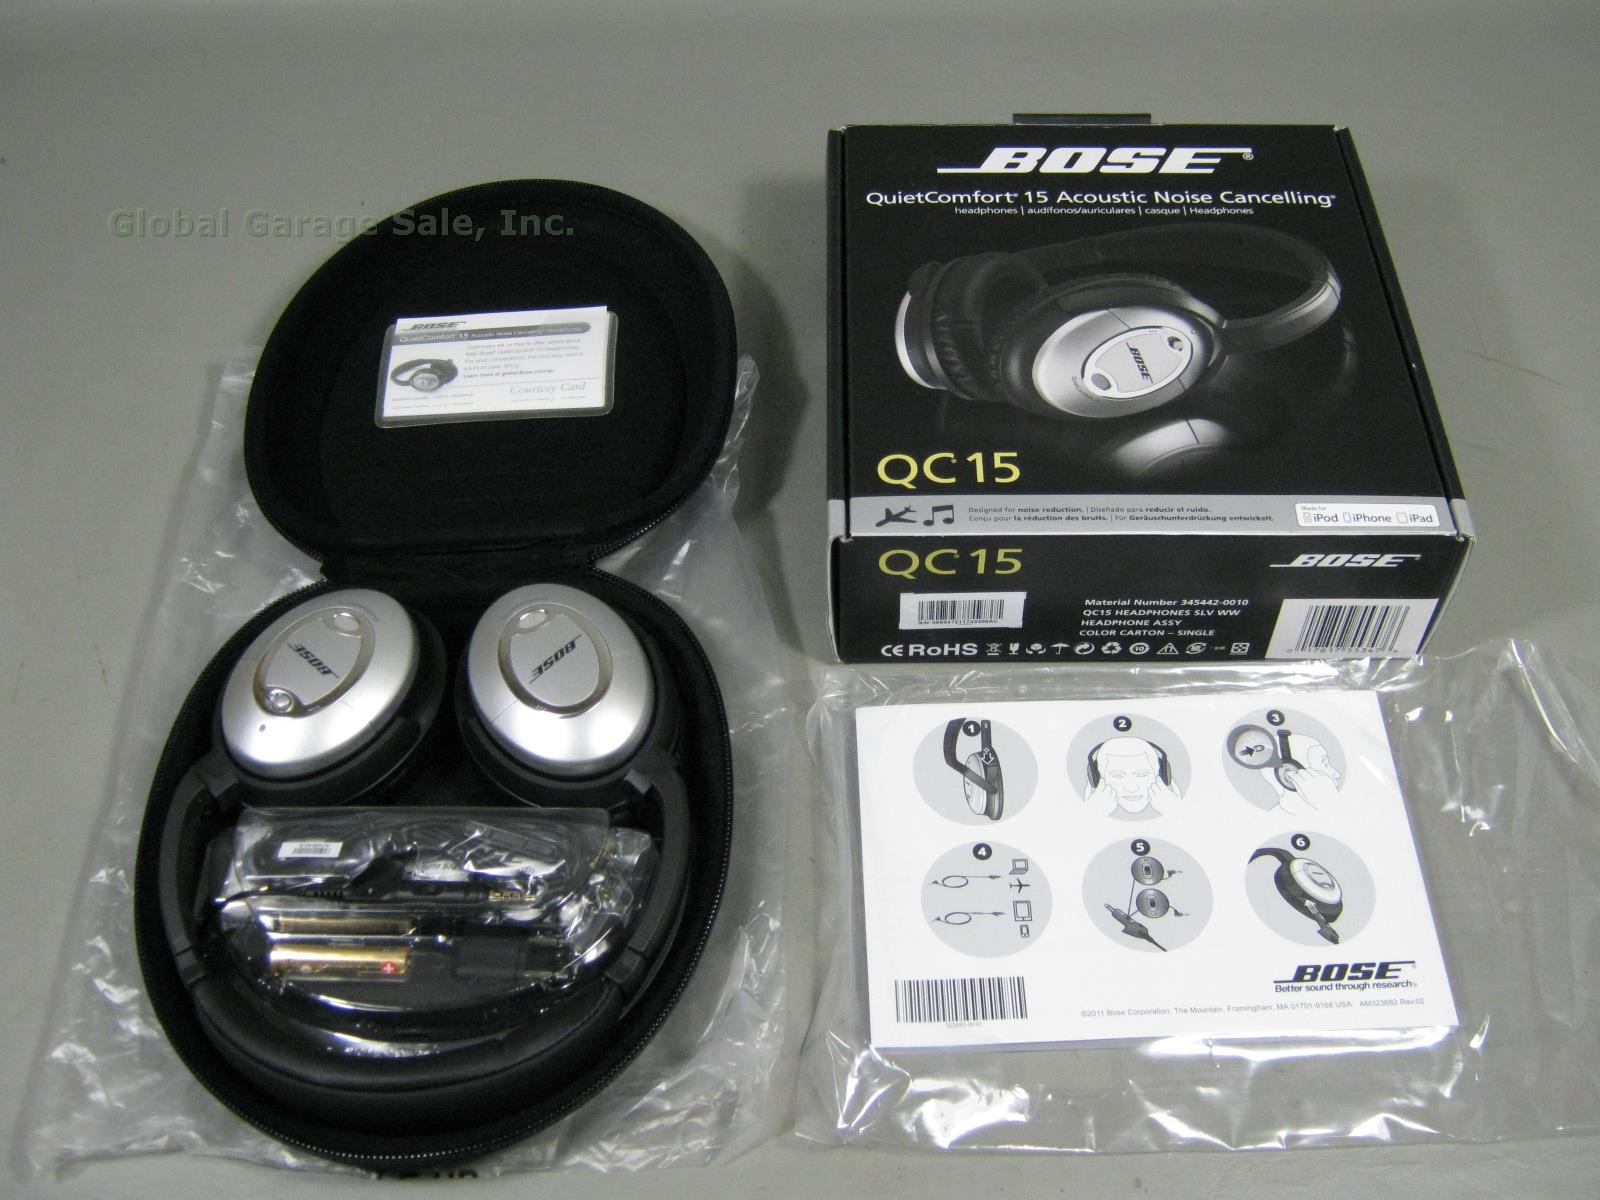 NEW Bose QC 15 QuietComfort Silver Acoustic Noise Cancelling Headphones W/Box NR